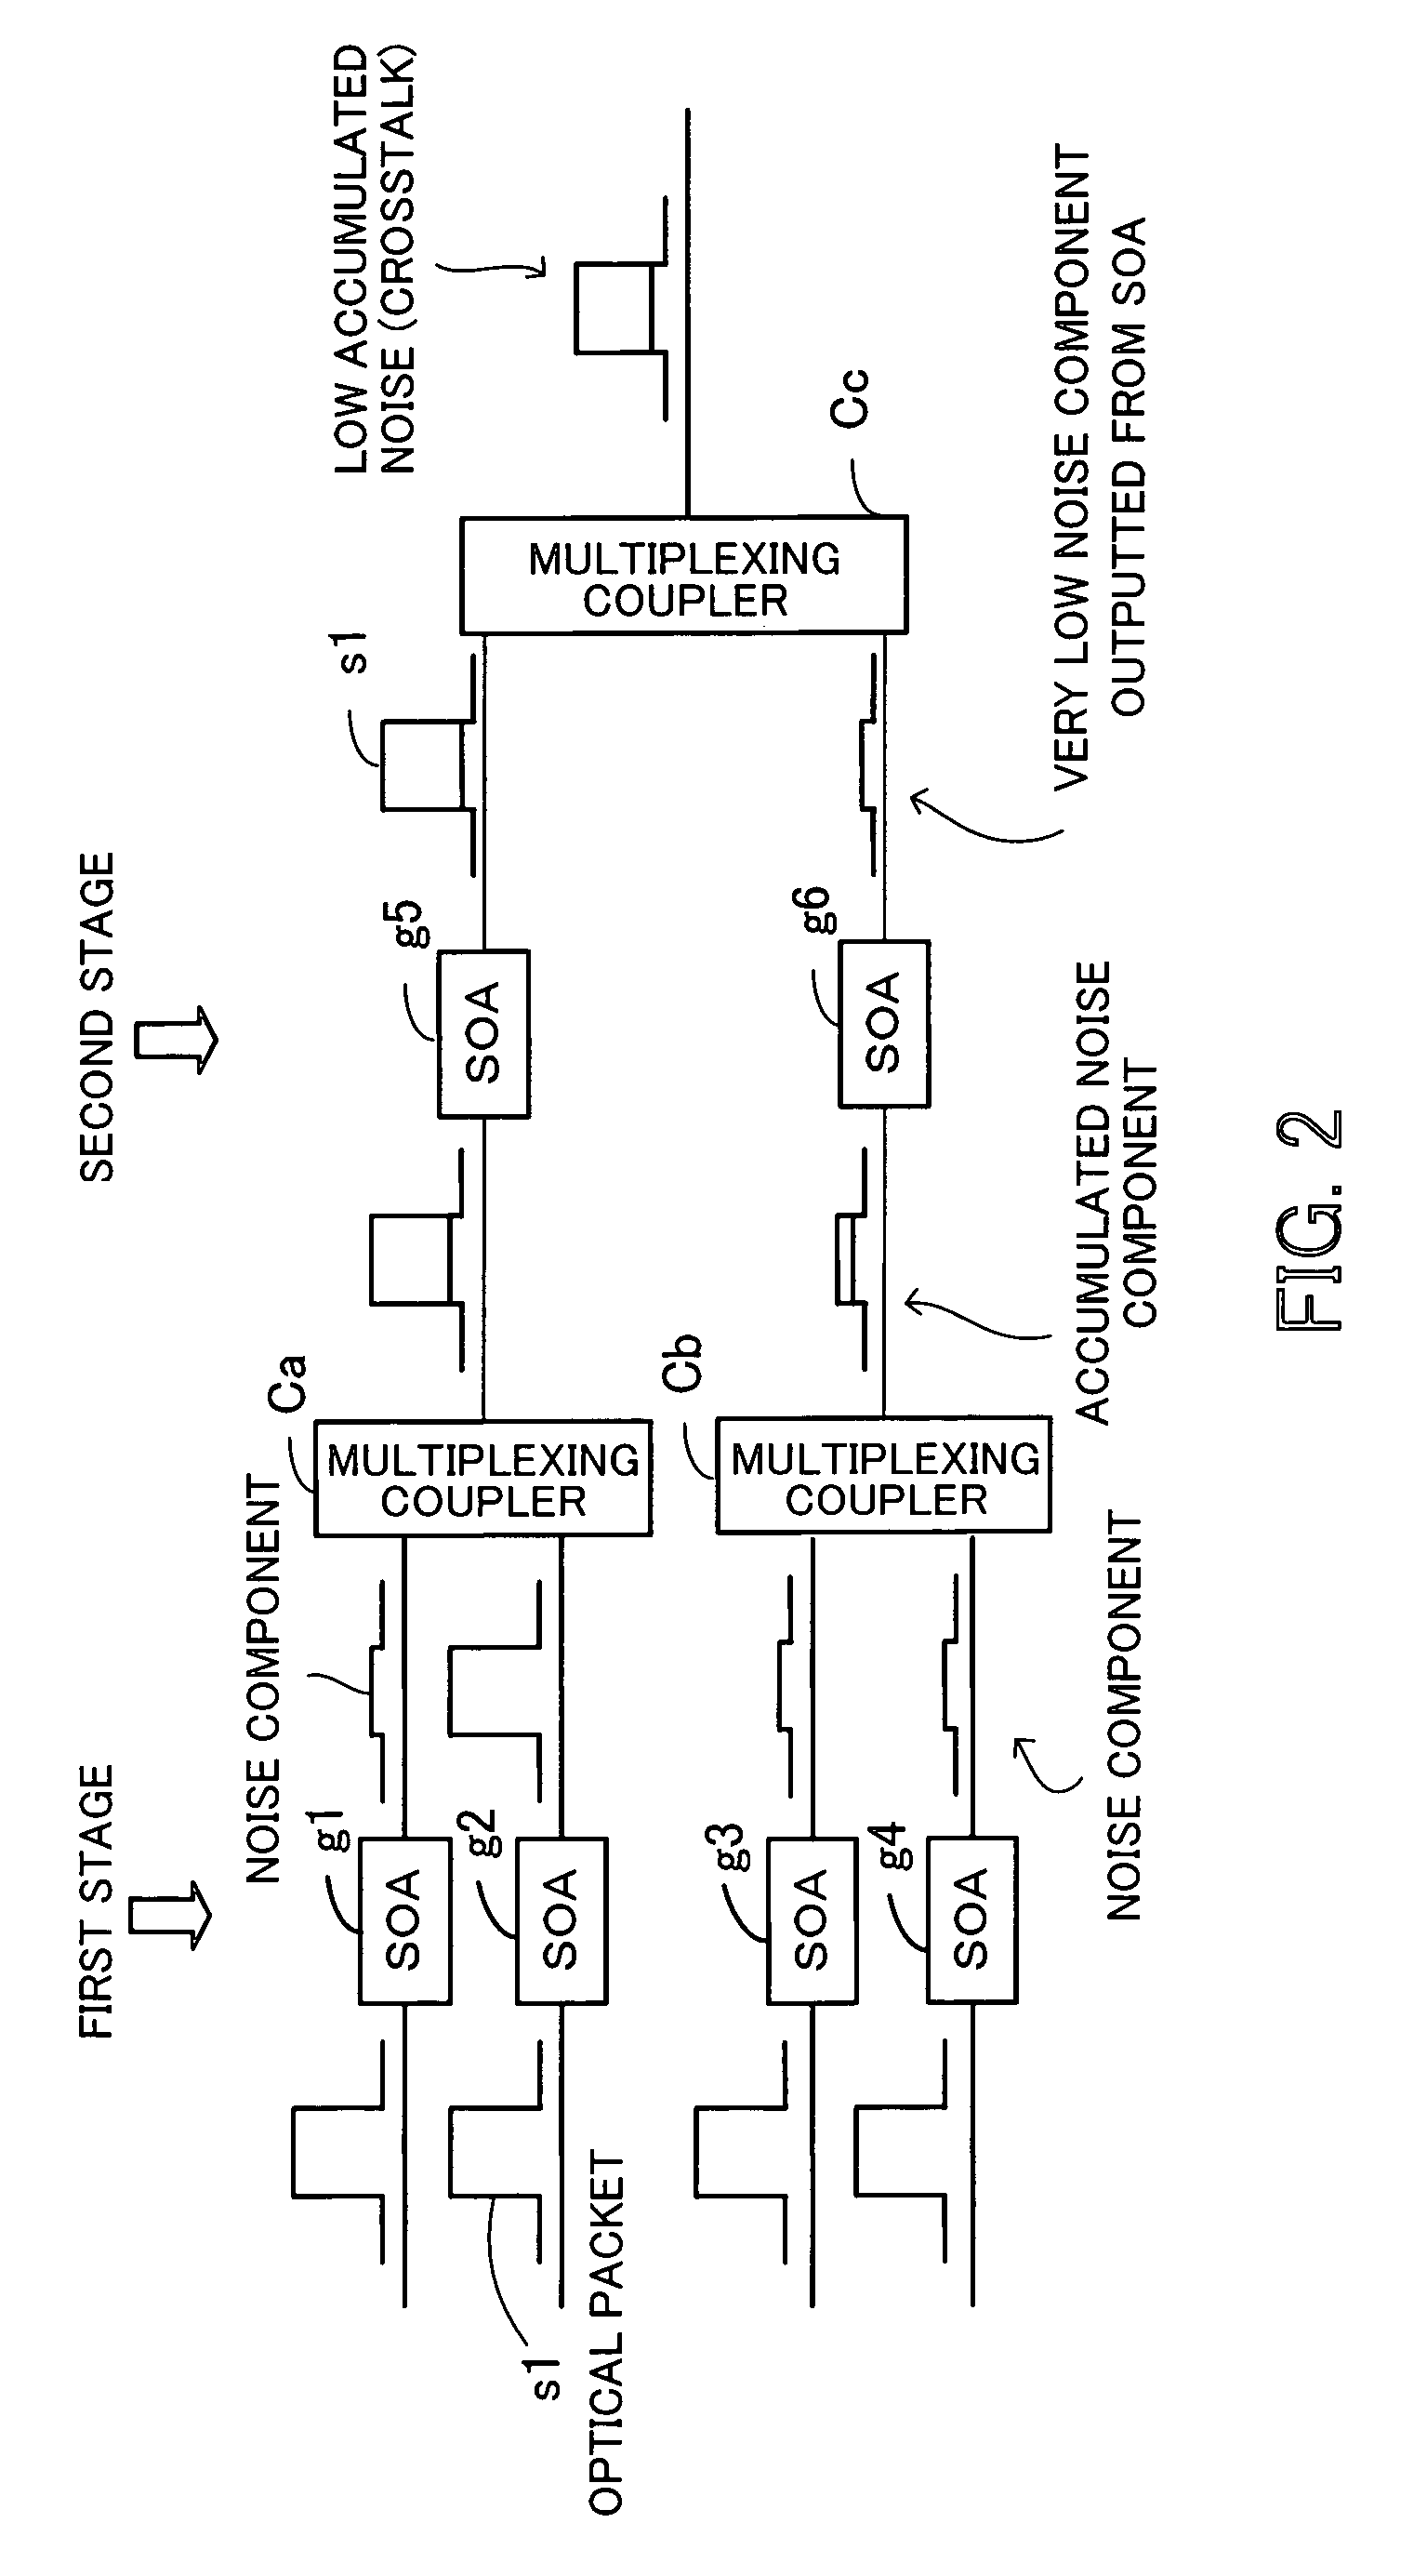 Optical packet switching system